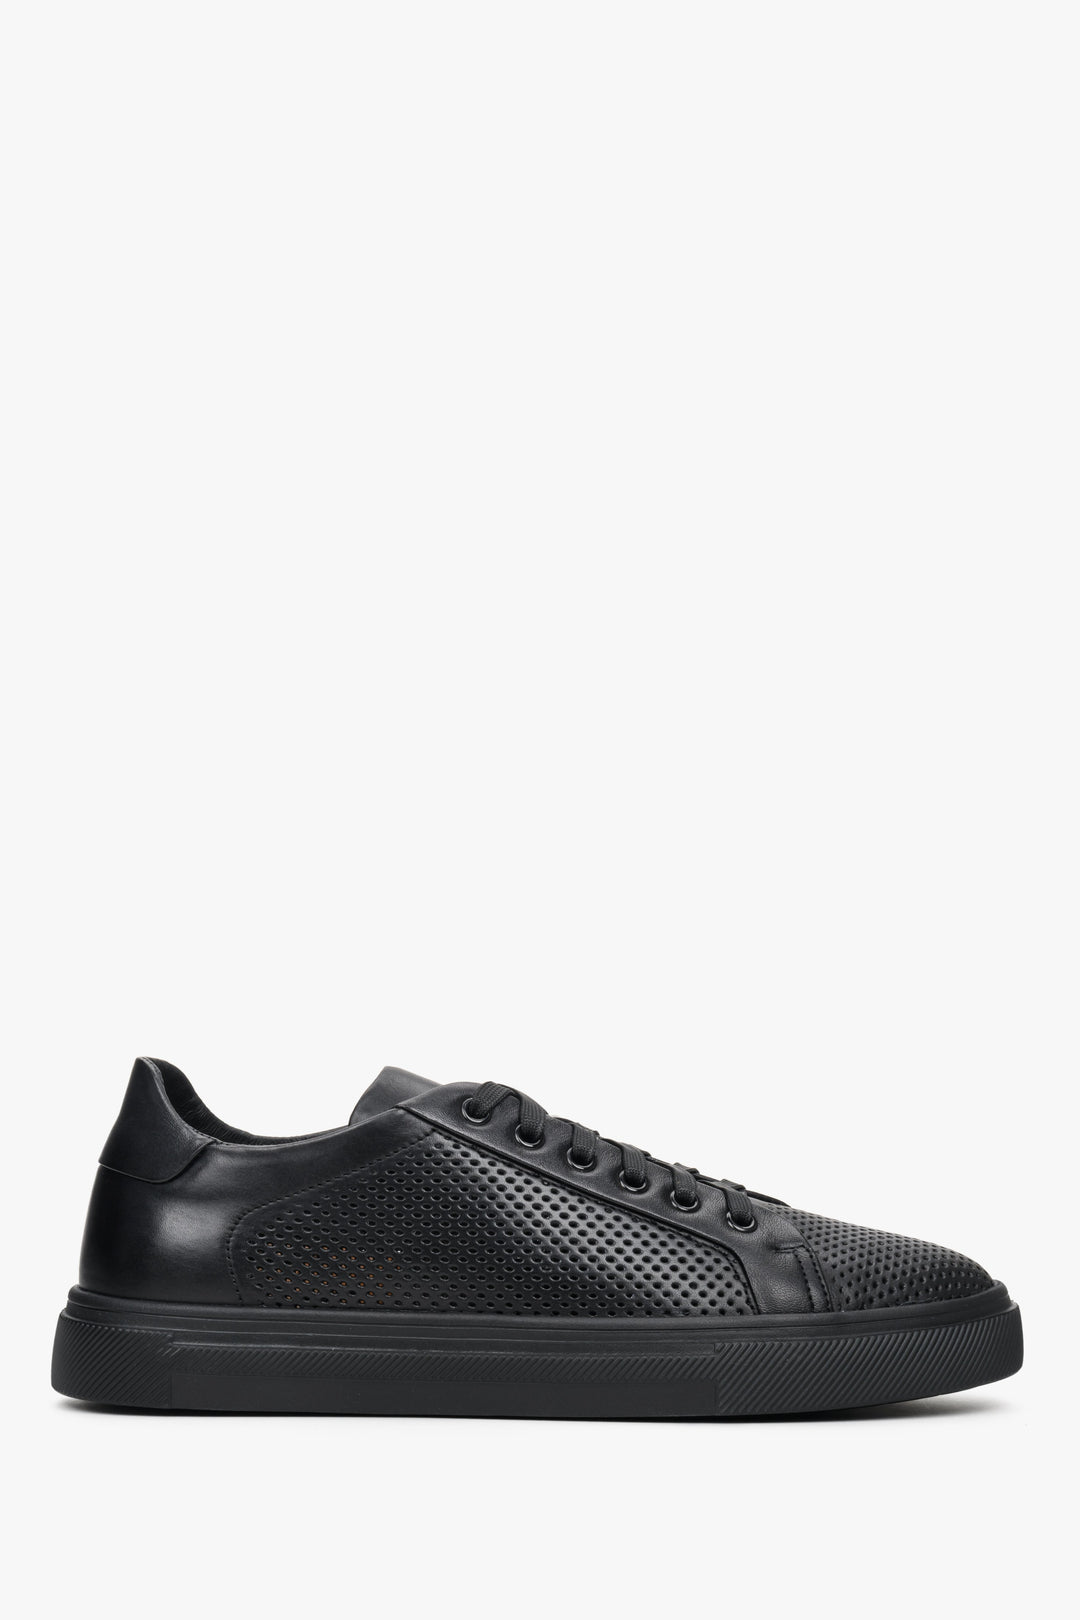 Men's black sneakers with perforations - shoe profile.